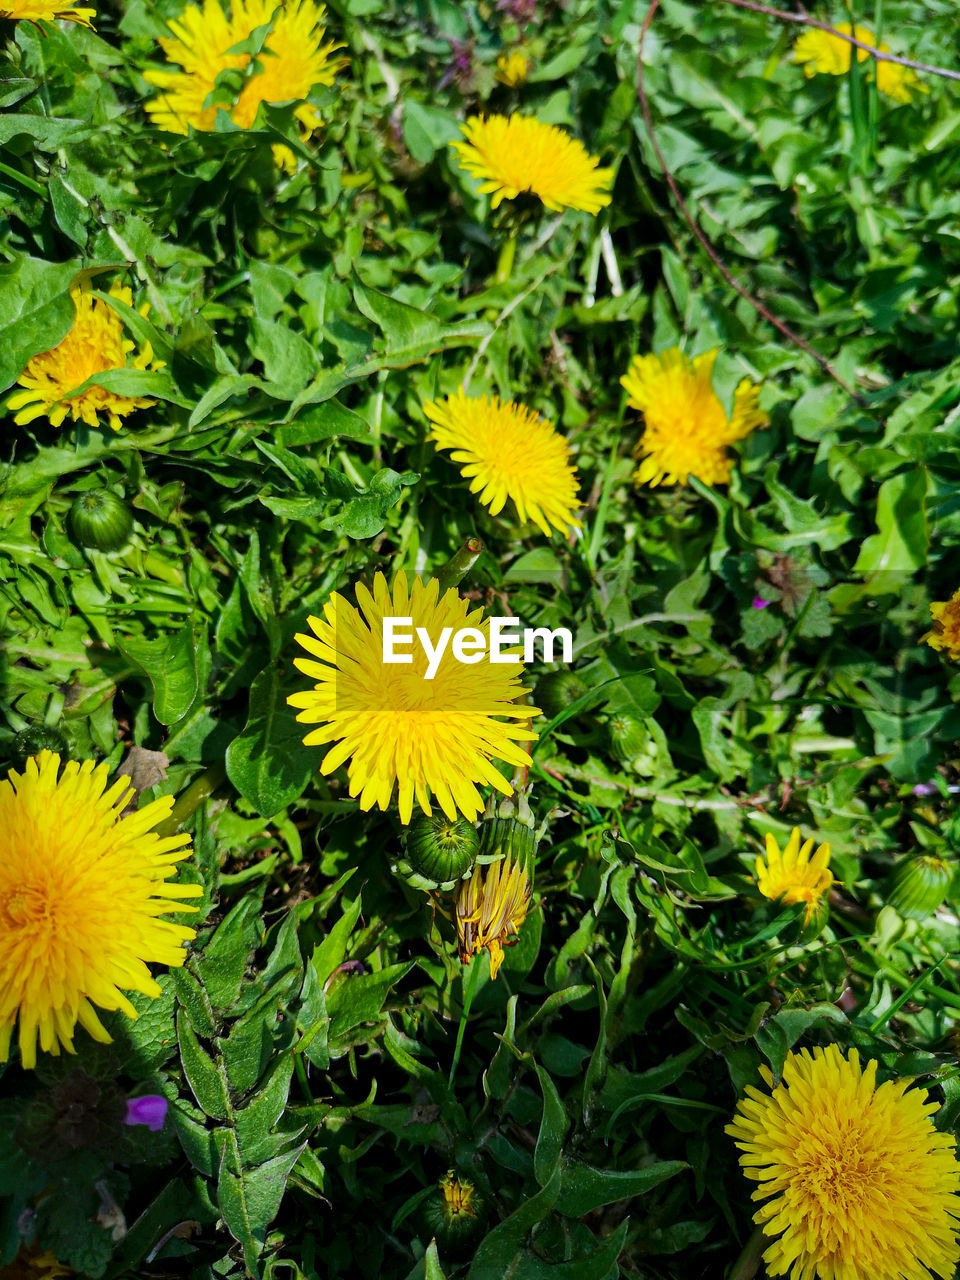 plant, flowering plant, flower, growth, beauty in nature, freshness, yellow, fragility, flower head, green, inflorescence, nature, petal, high angle view, plant part, leaf, day, no people, close-up, wildflower, field, meadow, outdoors, full frame, land, botany, herb, directly above